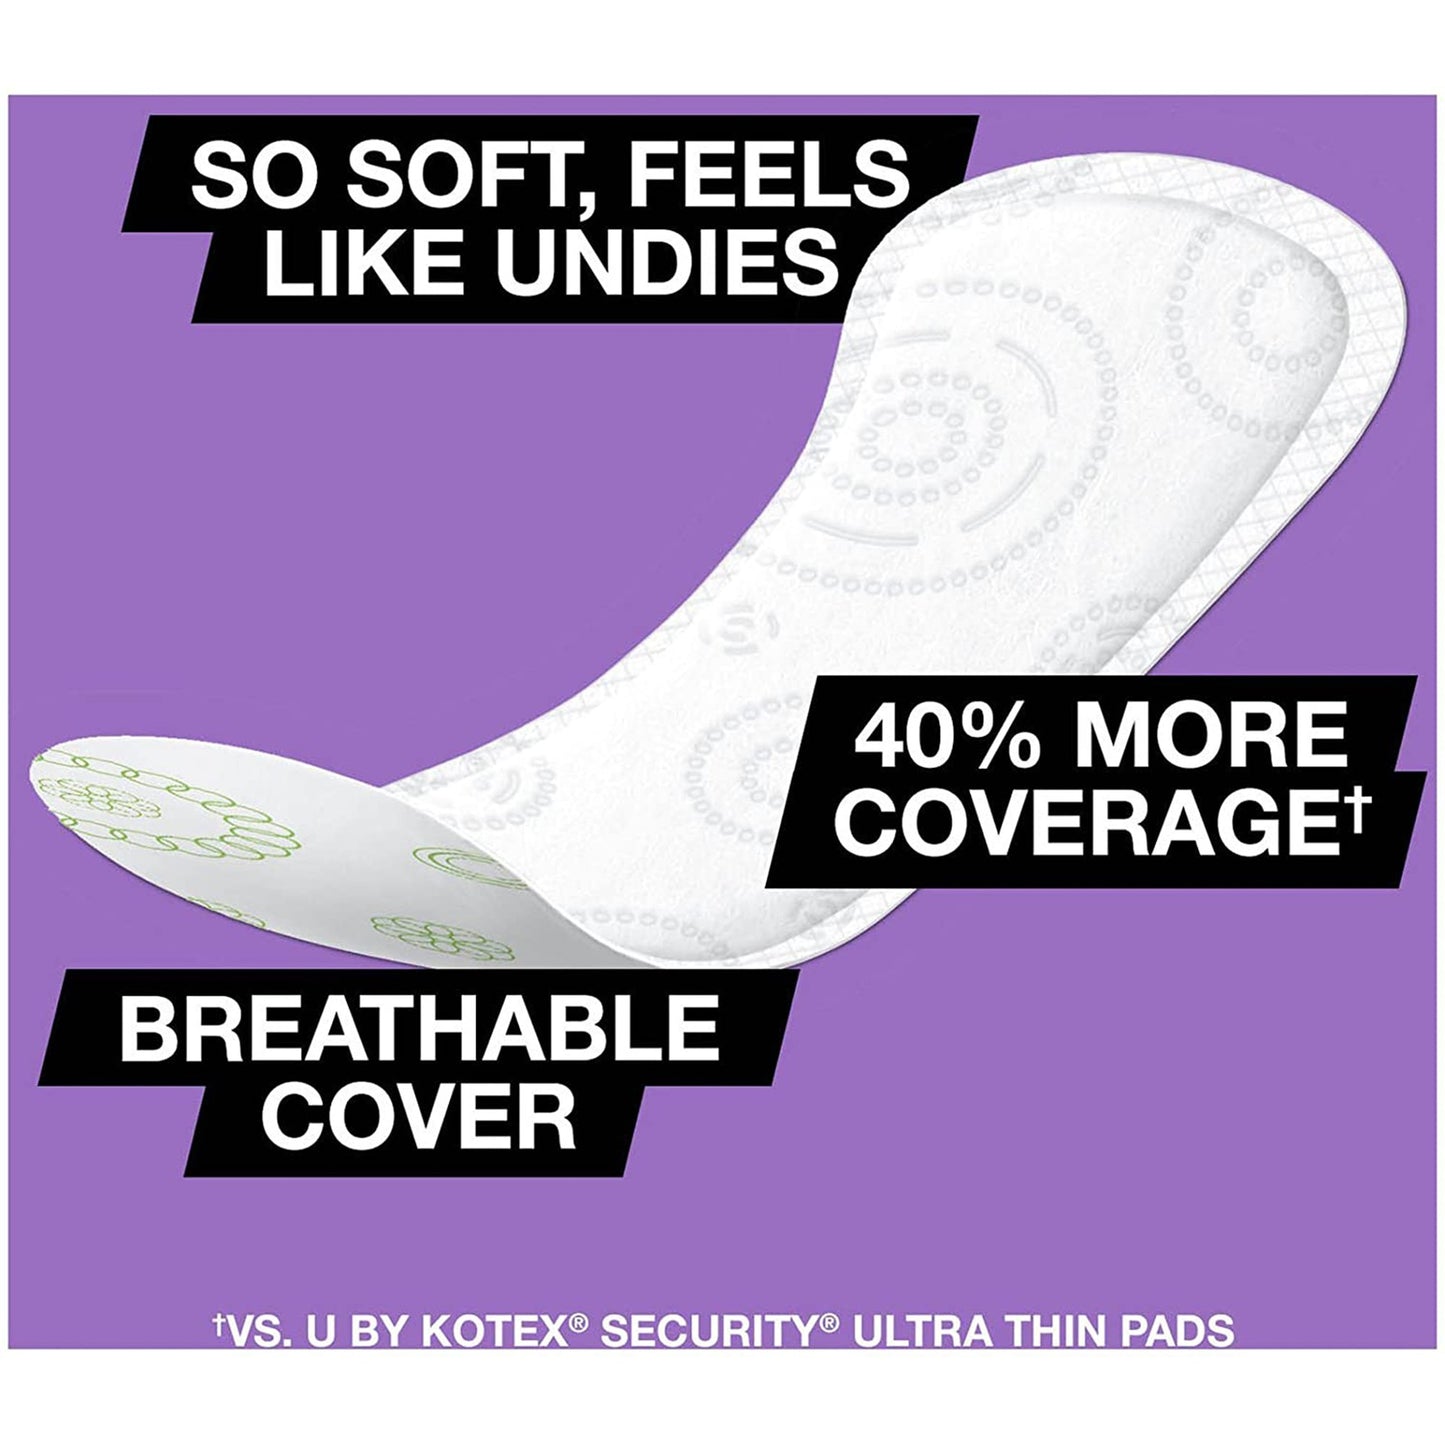 U by Kotex® Security® Lightdays® Liners, Extra-Coverage, 80 ct